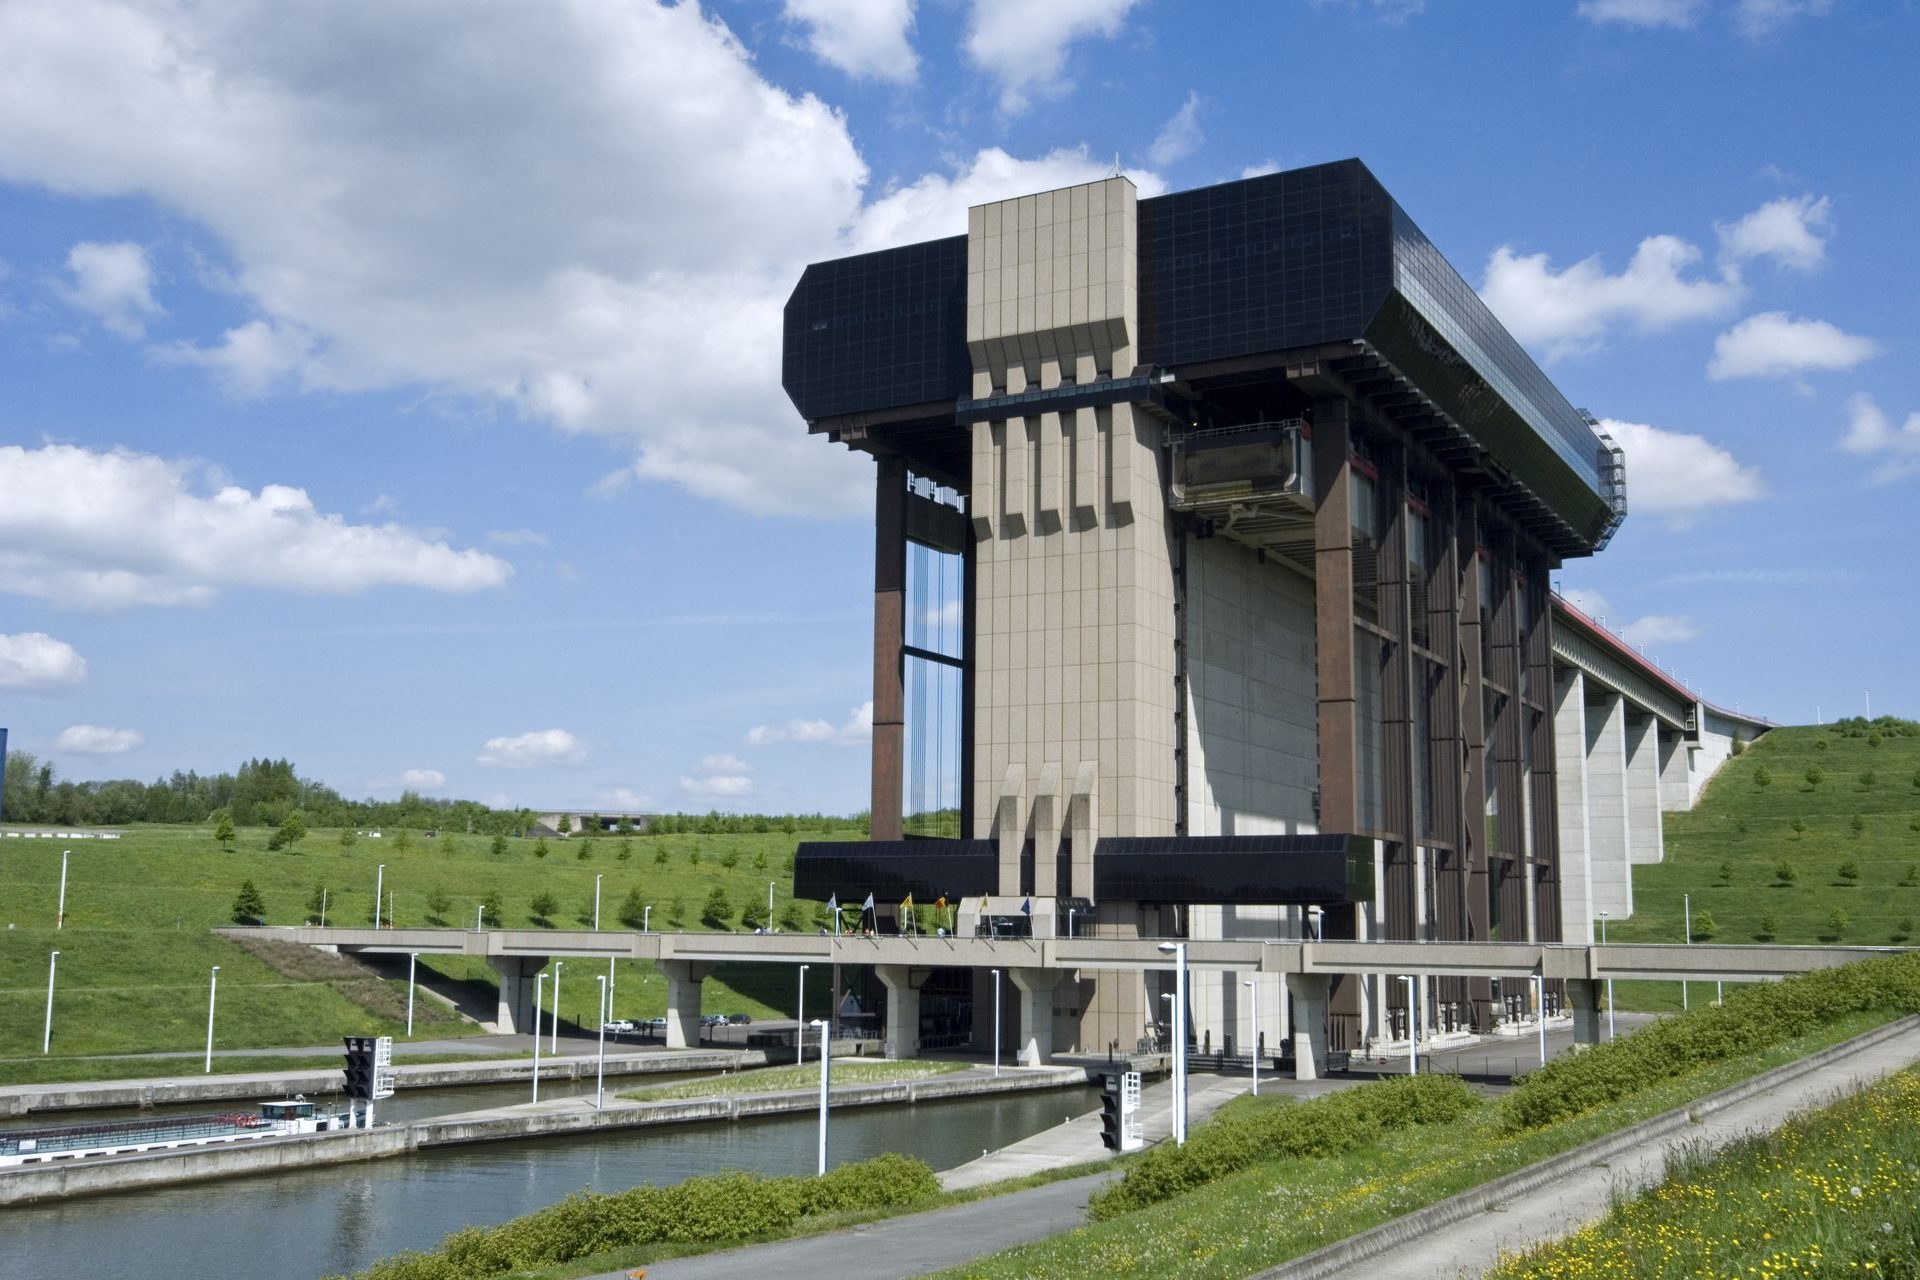 <p>Before being dethroned in 2016 by construction in China, the Strépy-Thieu boat elevator on the Canal du Centre was the largest in the world. Inaugurated in 2002, it reaches a height of 73 meters (240 ft).</p>